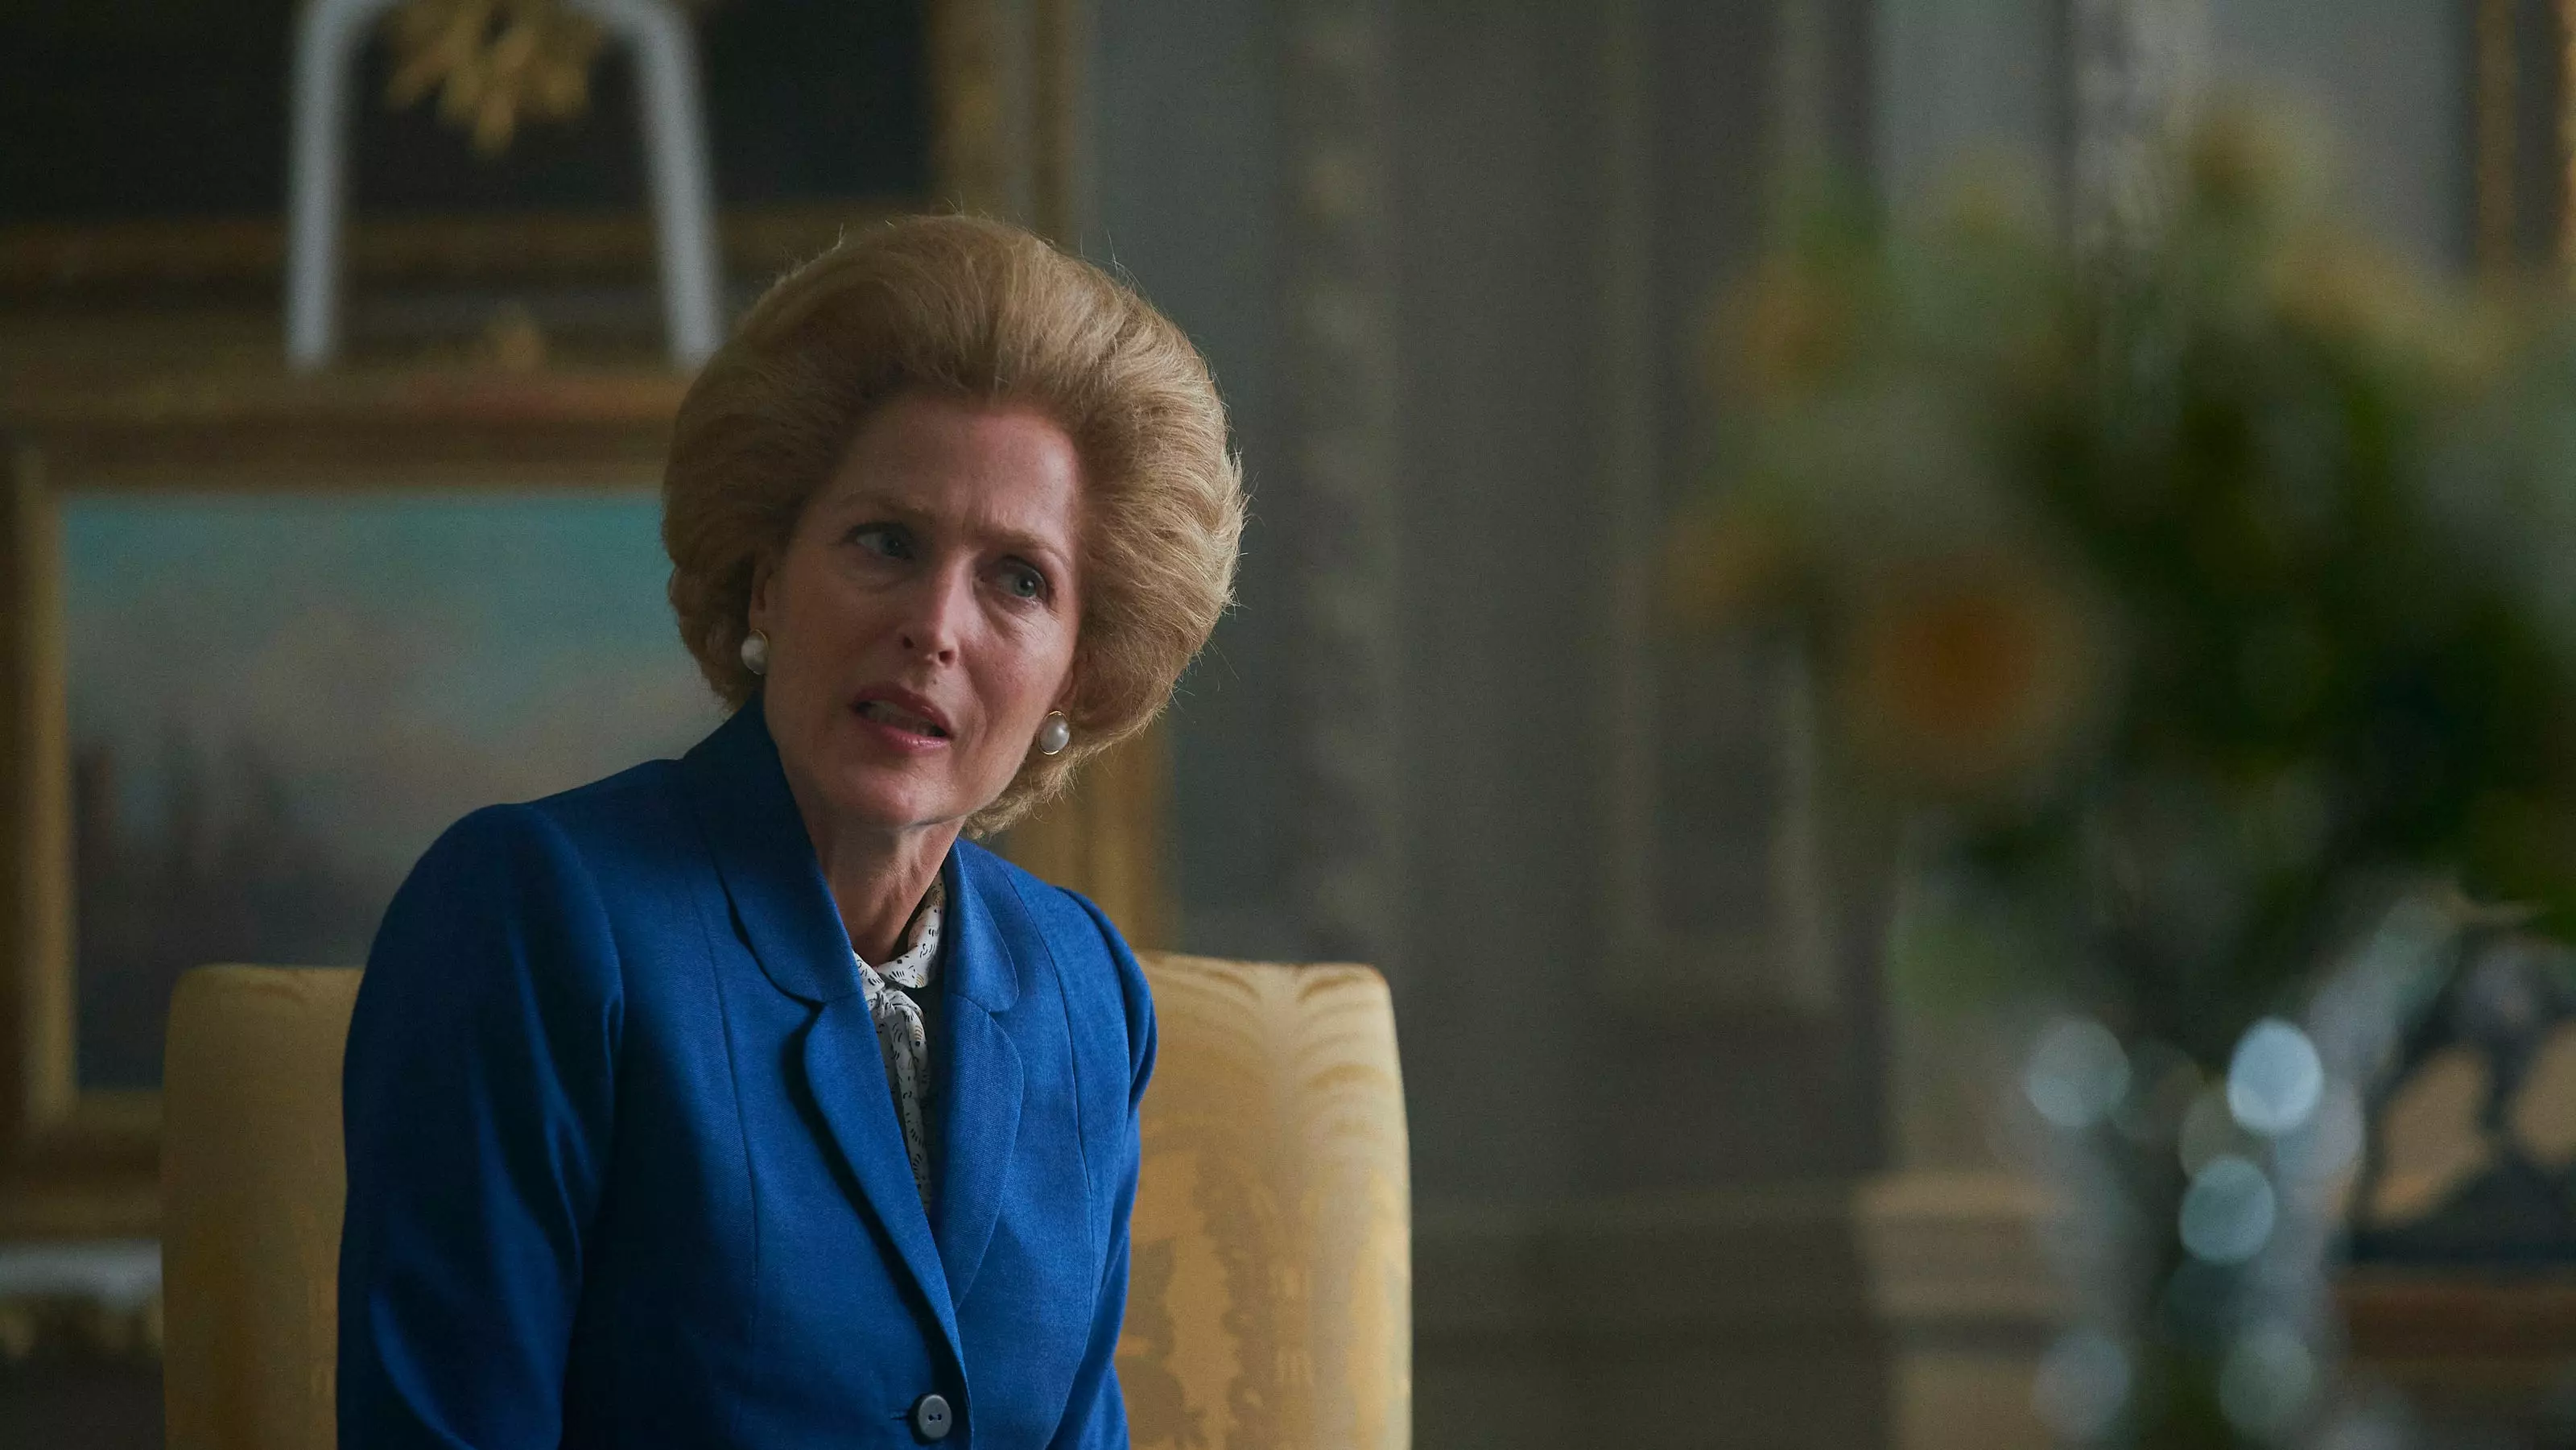 Amanda was referencing Gillian Anderson's performance as Margaret Thatcher in 'The Crown' (